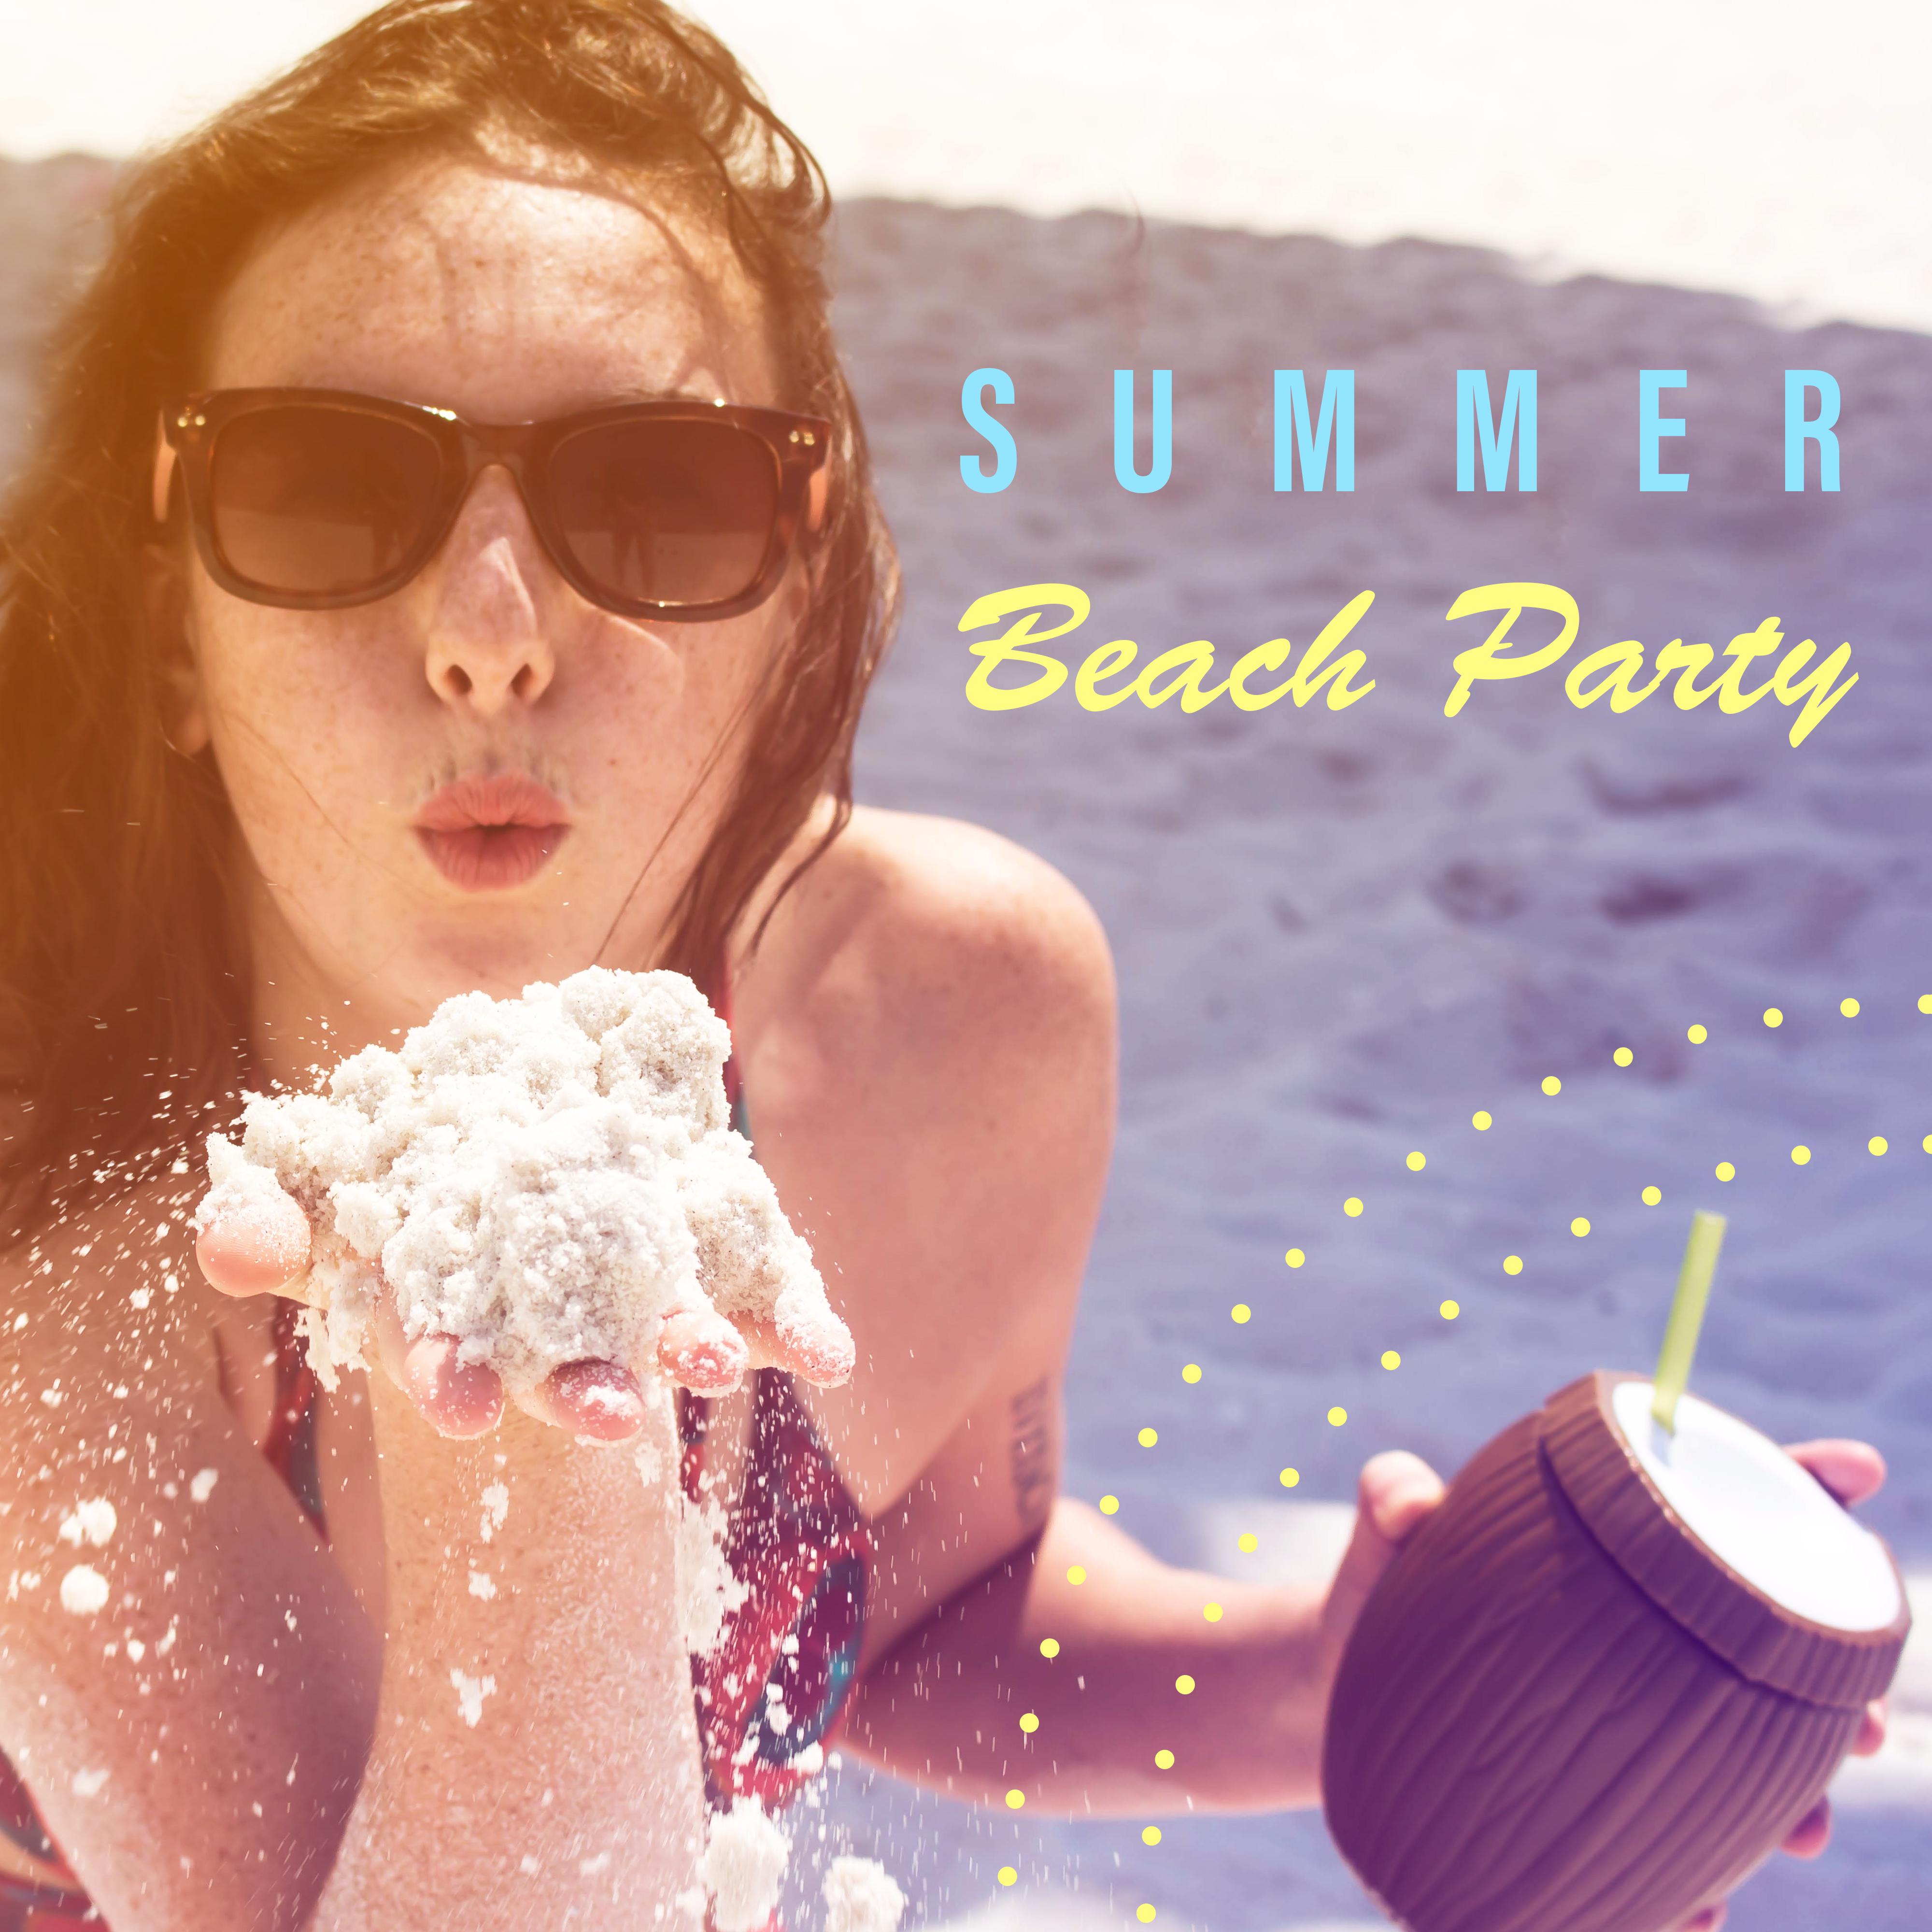 Summer Beach Party – Ibiza Relaxation, Sounds to Have Fun, Chill Out Music, Rest & Relax